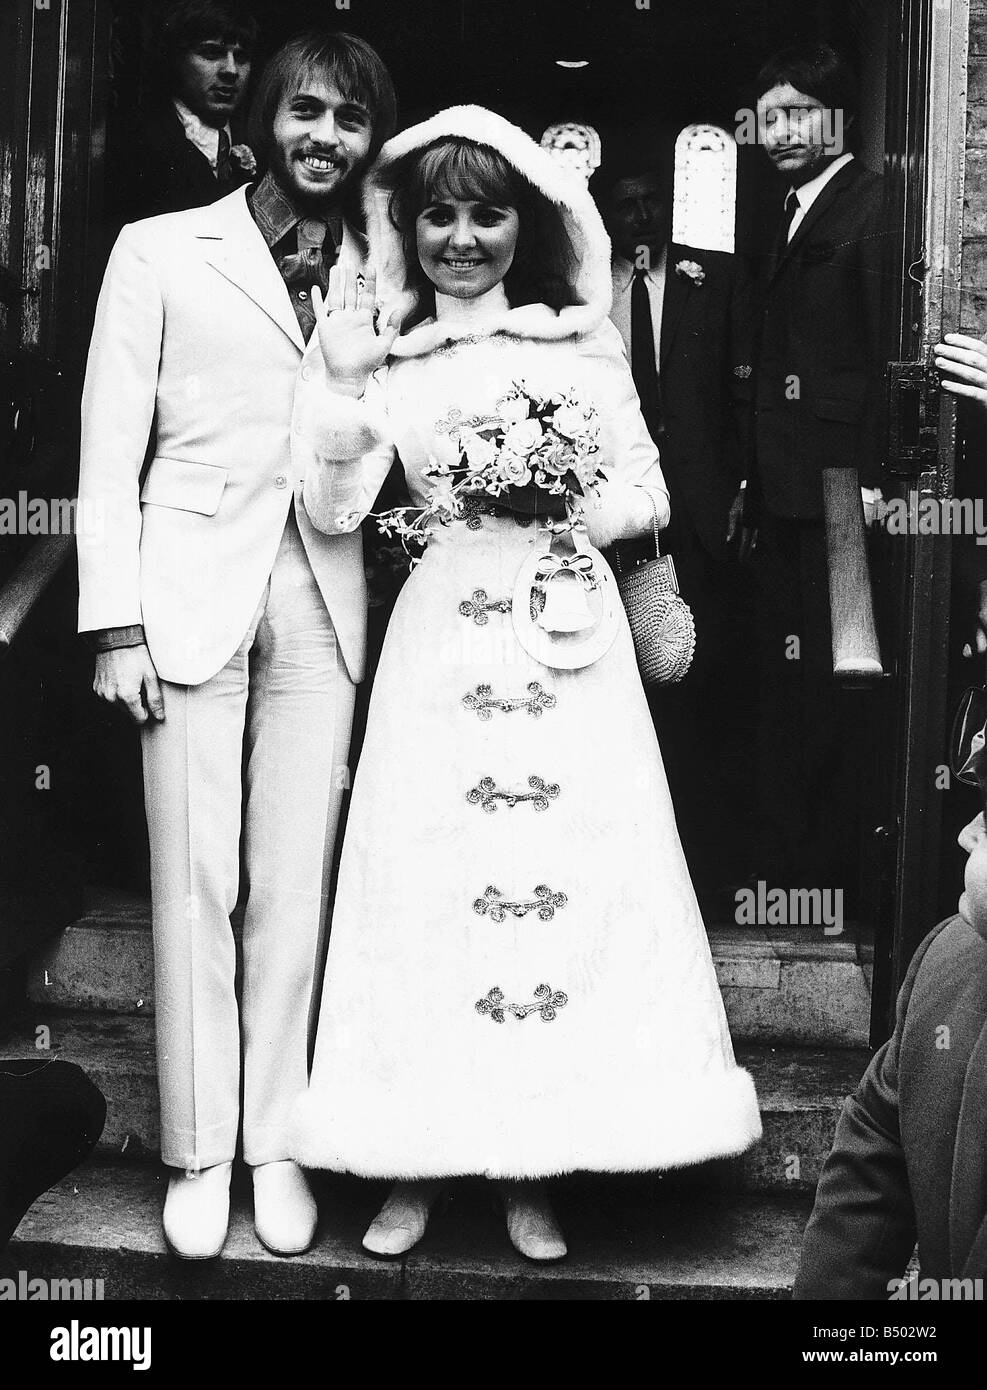 Maurice Gibb member of the pop group The Bee Gees stands with his new wife Singer Lulu outside St James Church in Gerrards Cross in Buckinghamshire Stock Photo